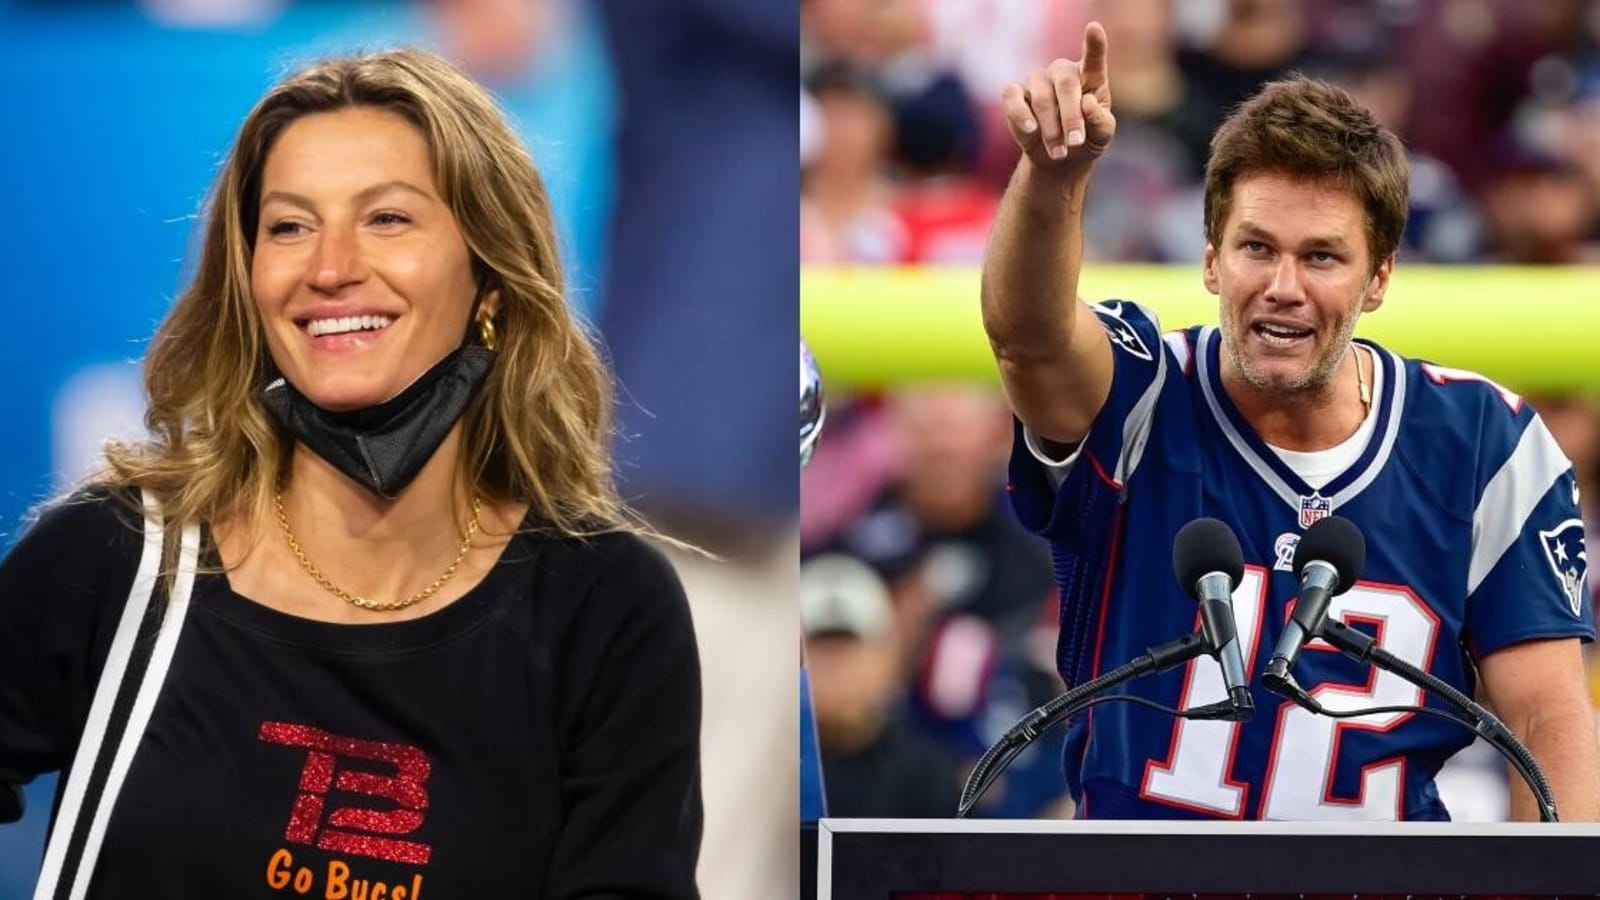 Report: Tom Brady’s ex Gisele Bündchen ‘deeply disappointed’ with jokes about marriage in Netflix roast